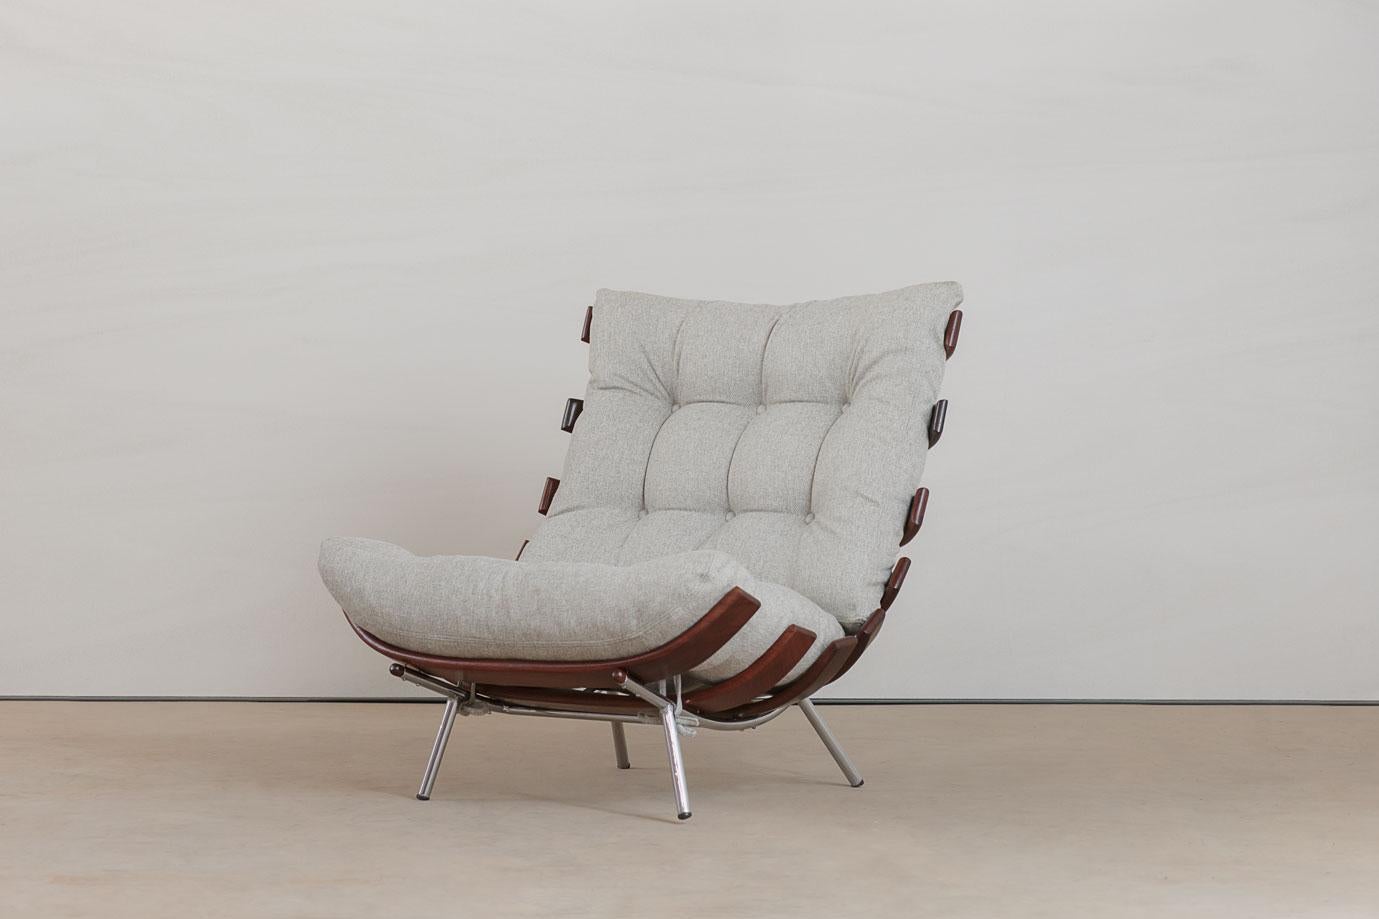 Rib chair ‘also called Costela chair’ designed by Martin Eisler and Carlo Hauner in Brazilian Imbuia wood and metal. These chairs are iconic Brazilian Mid-Century Modern pieces, circa 1960. The chair has been recently reupholstered in off white